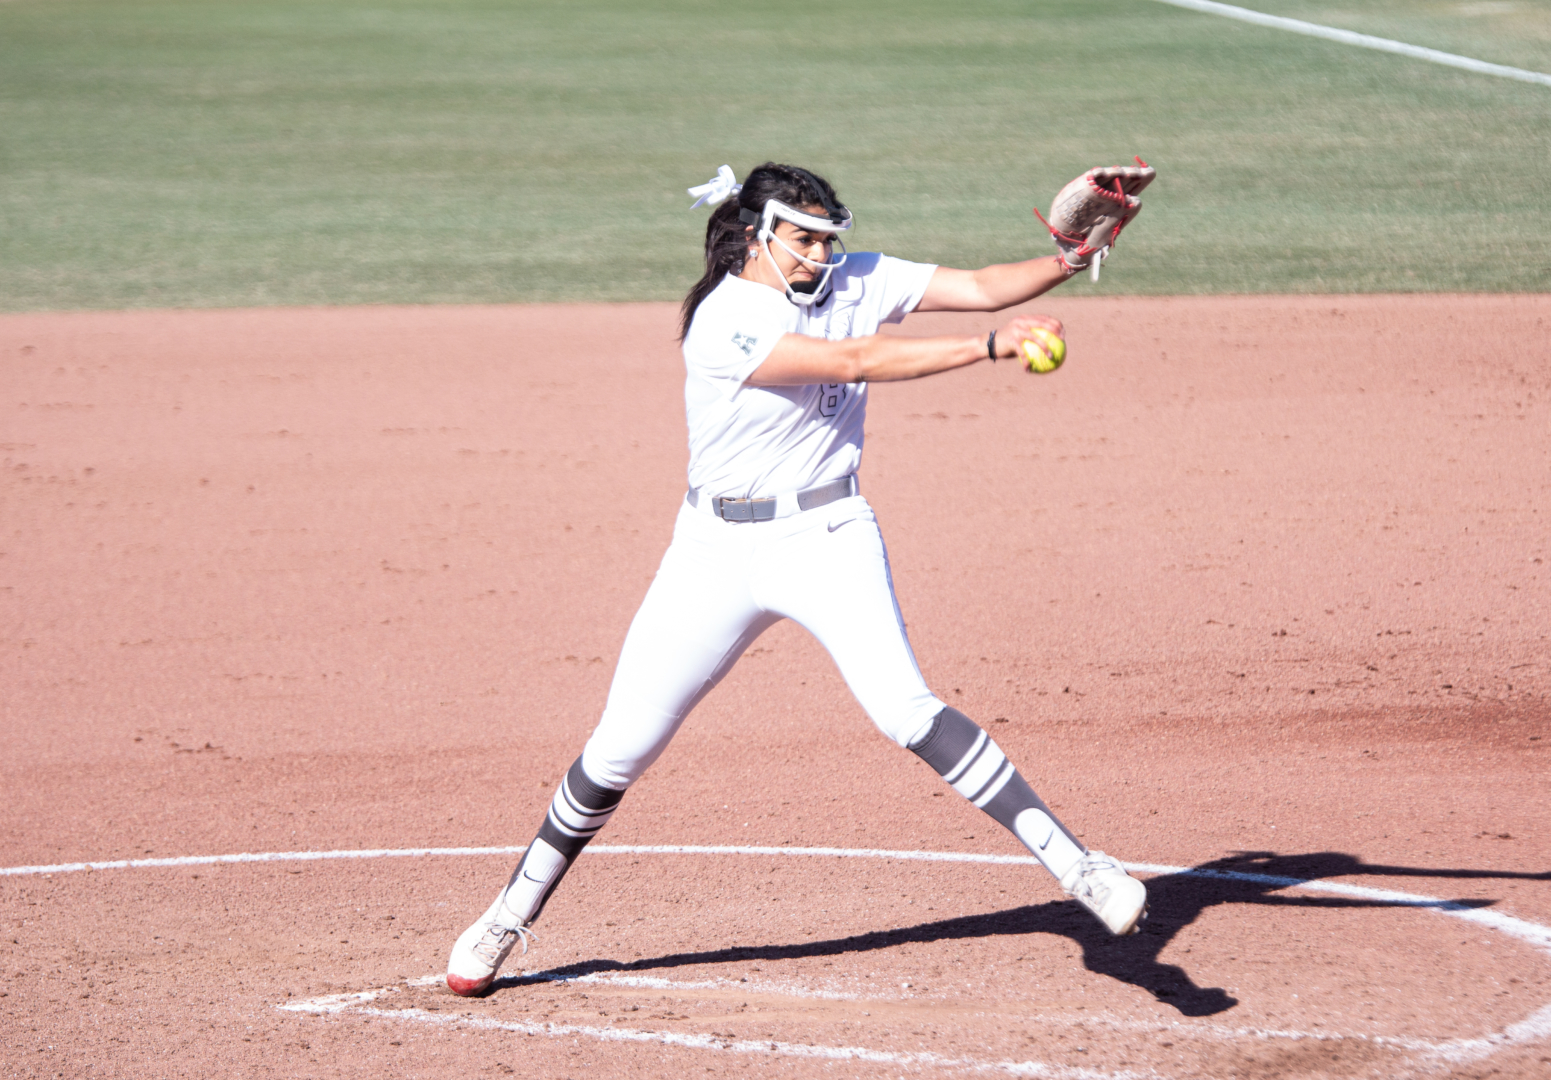 UH softball senior pitcher Saleen Flores struggled in her three appearances at the Houston Classic, giving up 11 earned runs in seven innings pitched. | Sean Thomas/The Cougar